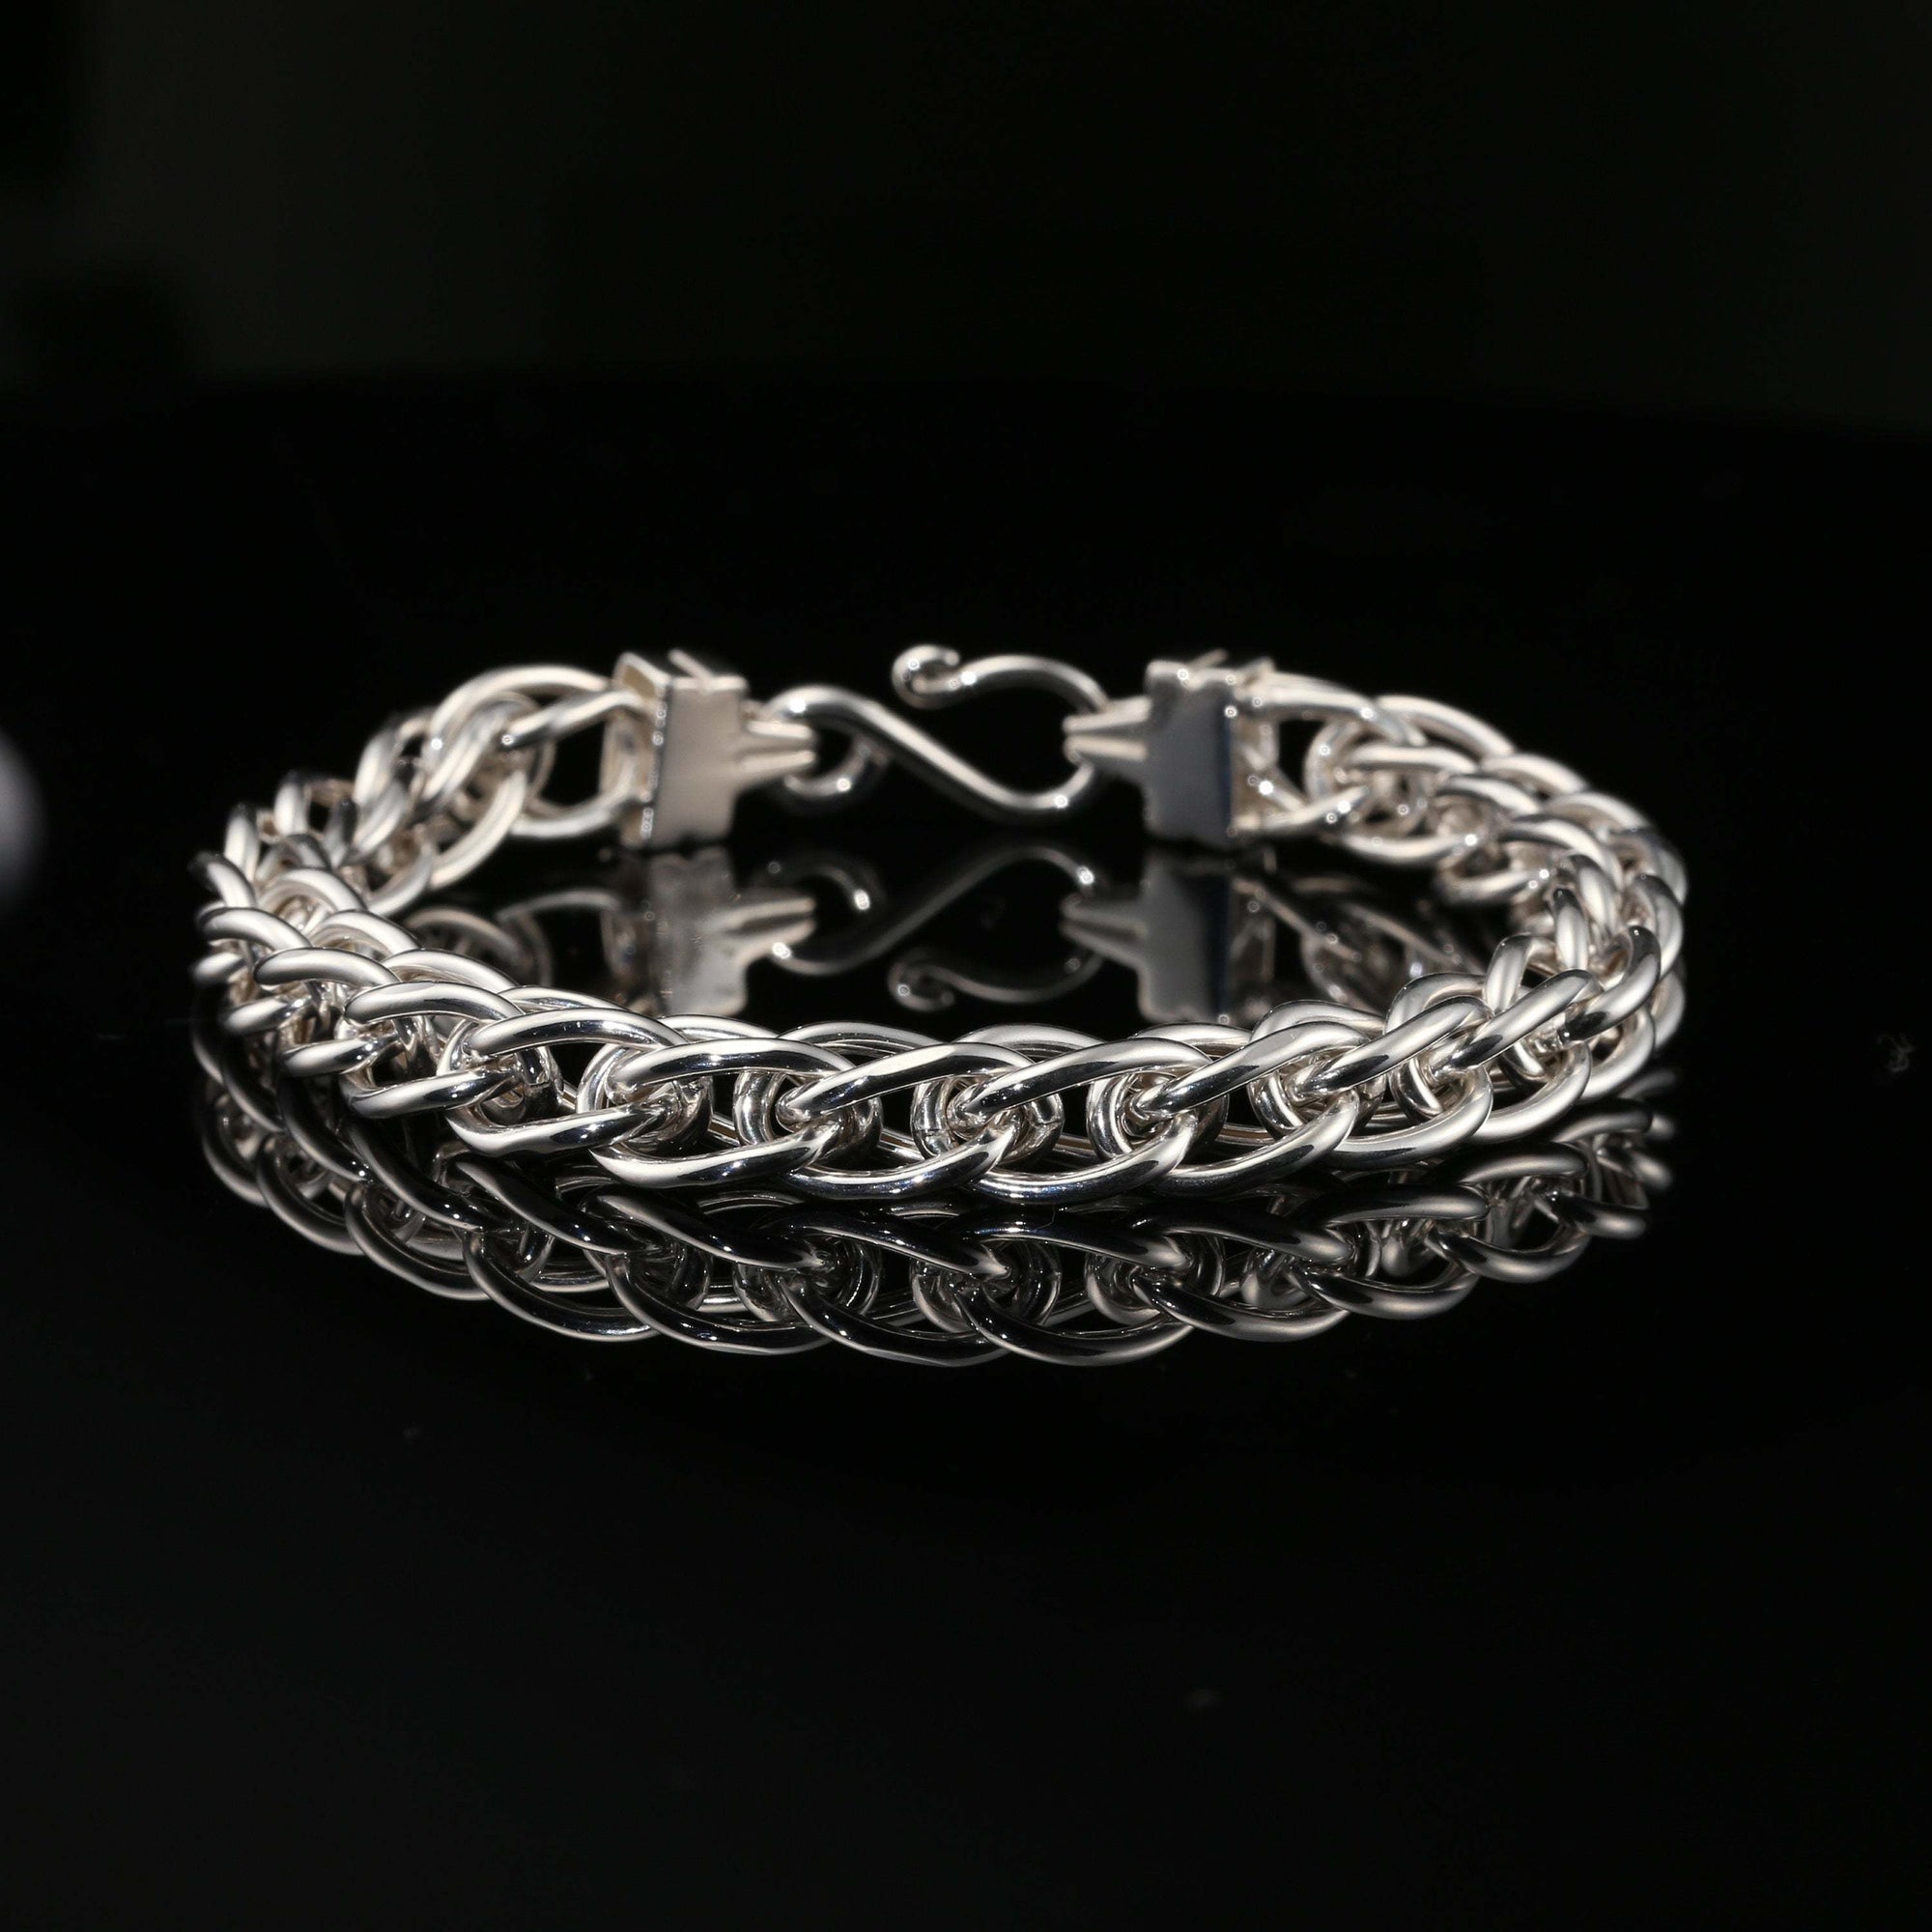 Byzantine Chain Bracelet with Hook Clasp in Sterling Silver, 8&amp;quot;, Unisex